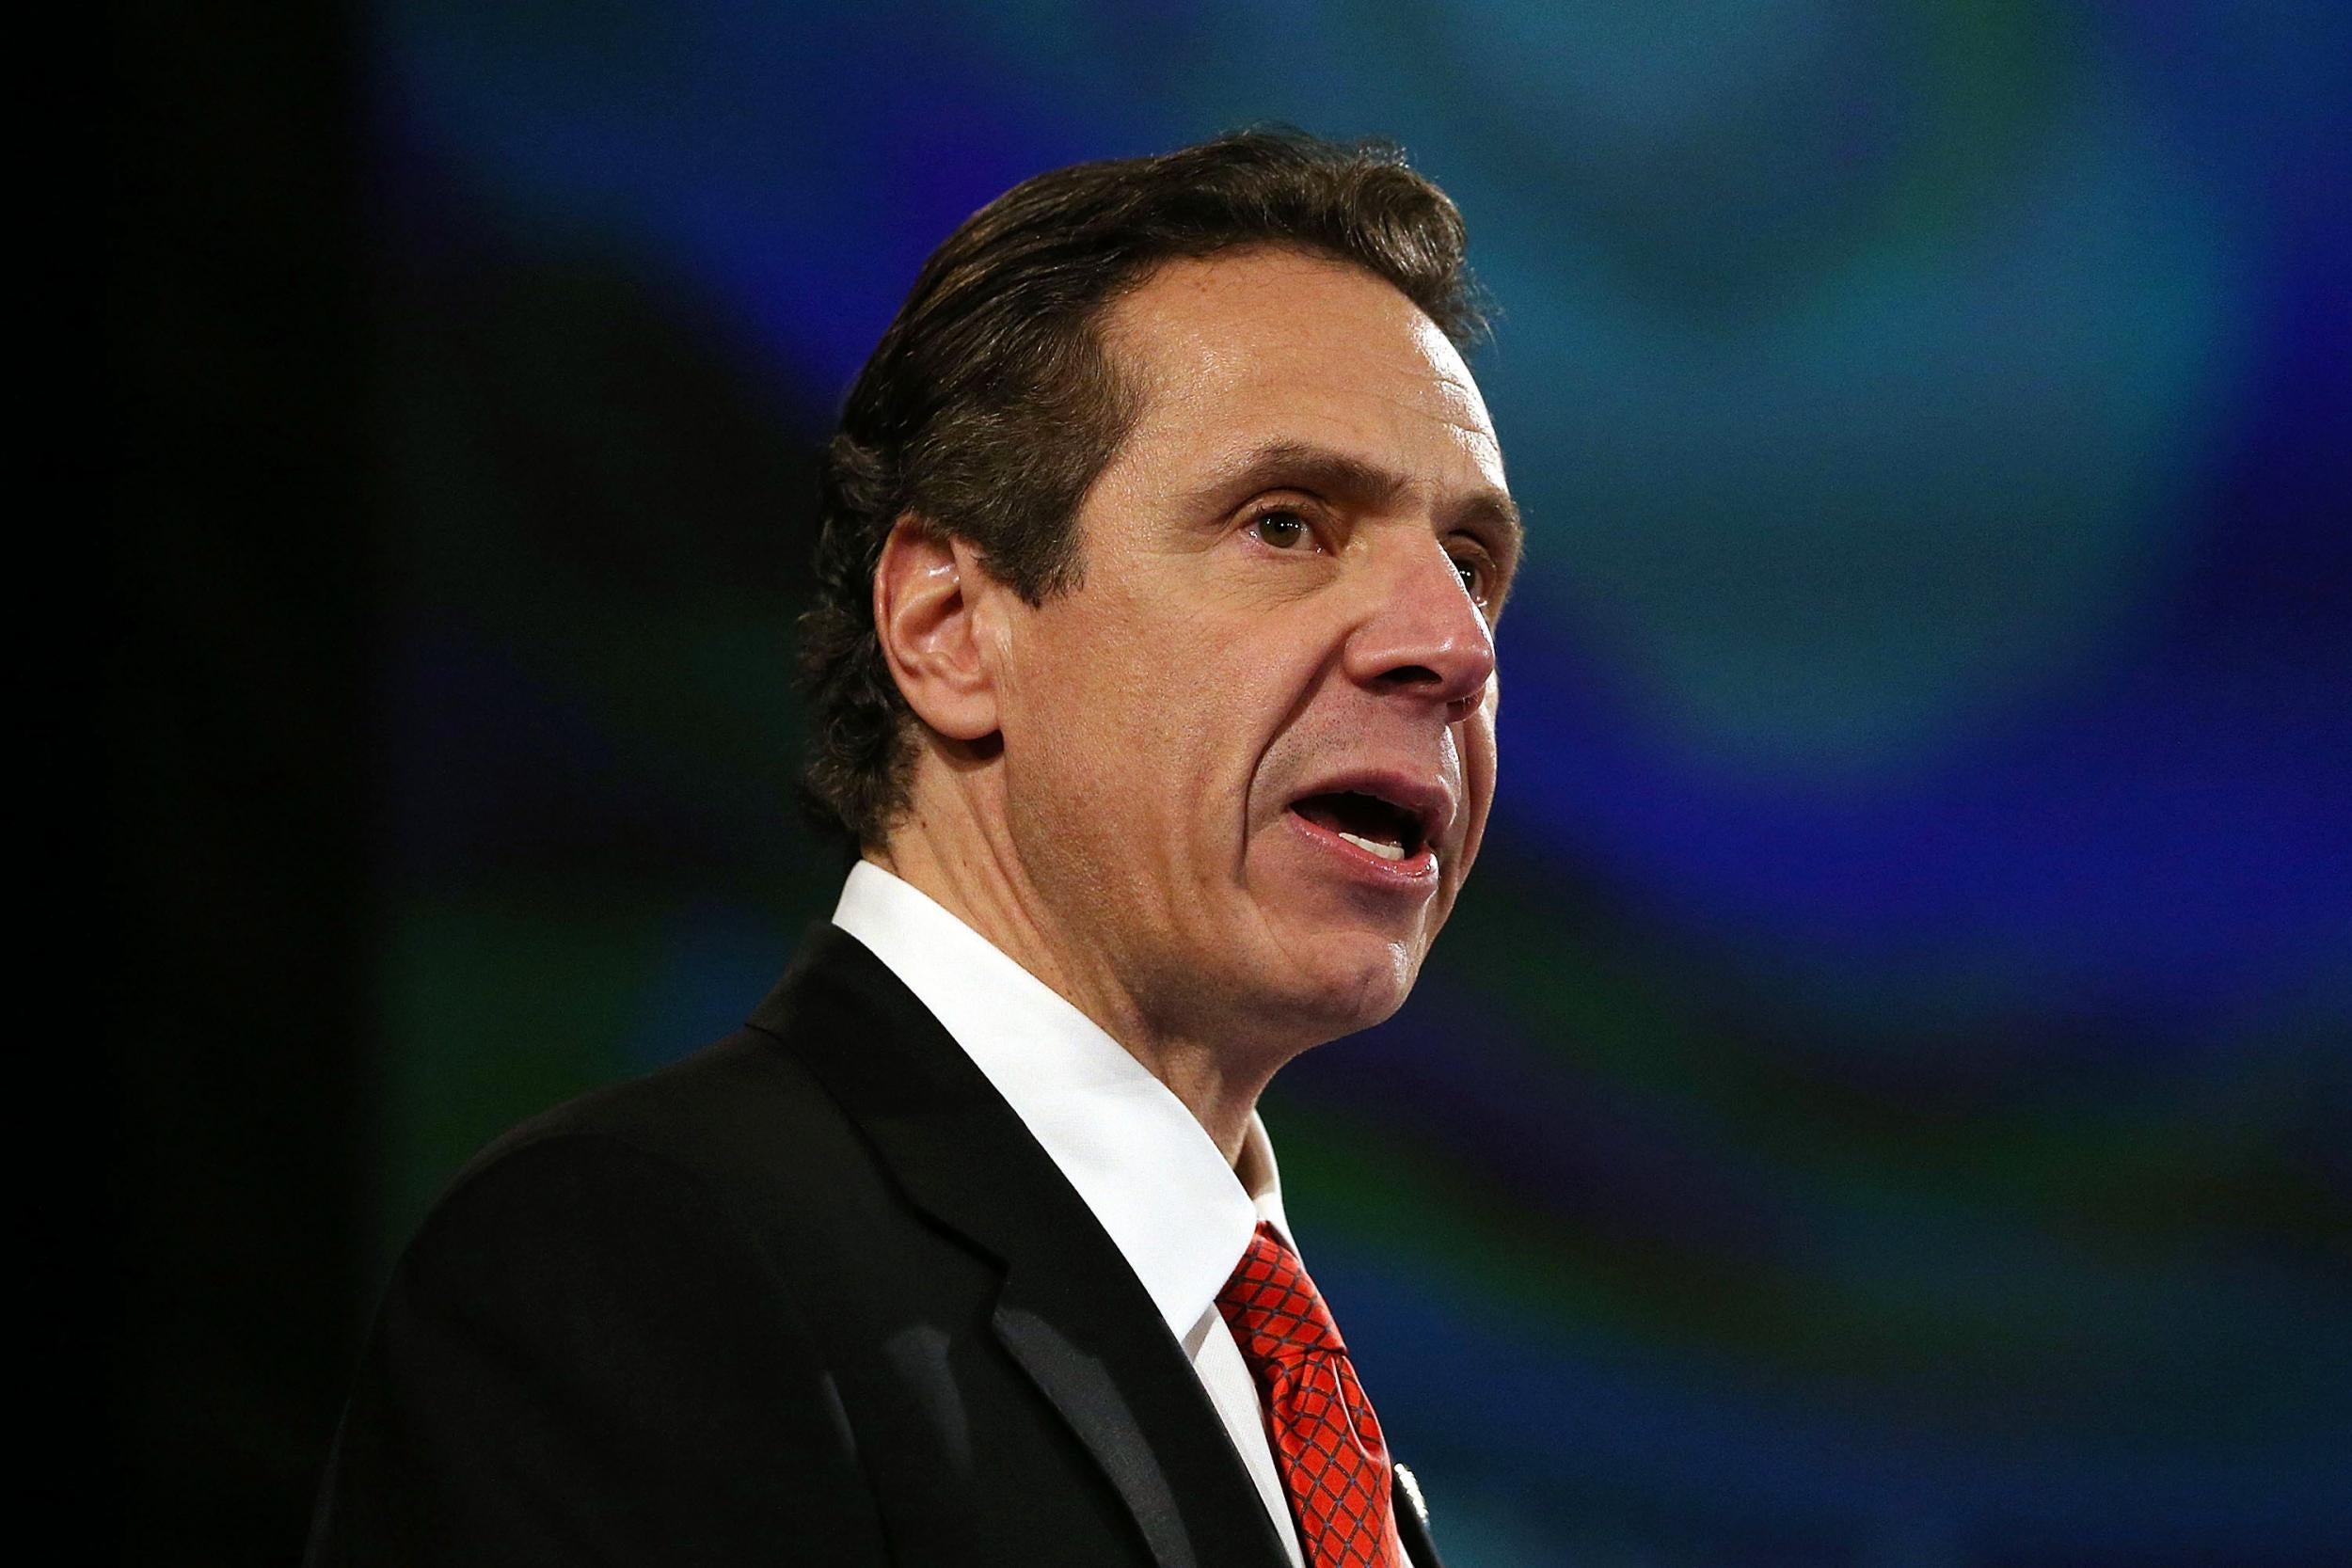 Wealthy New Yorkers ask governor to raise their taxes